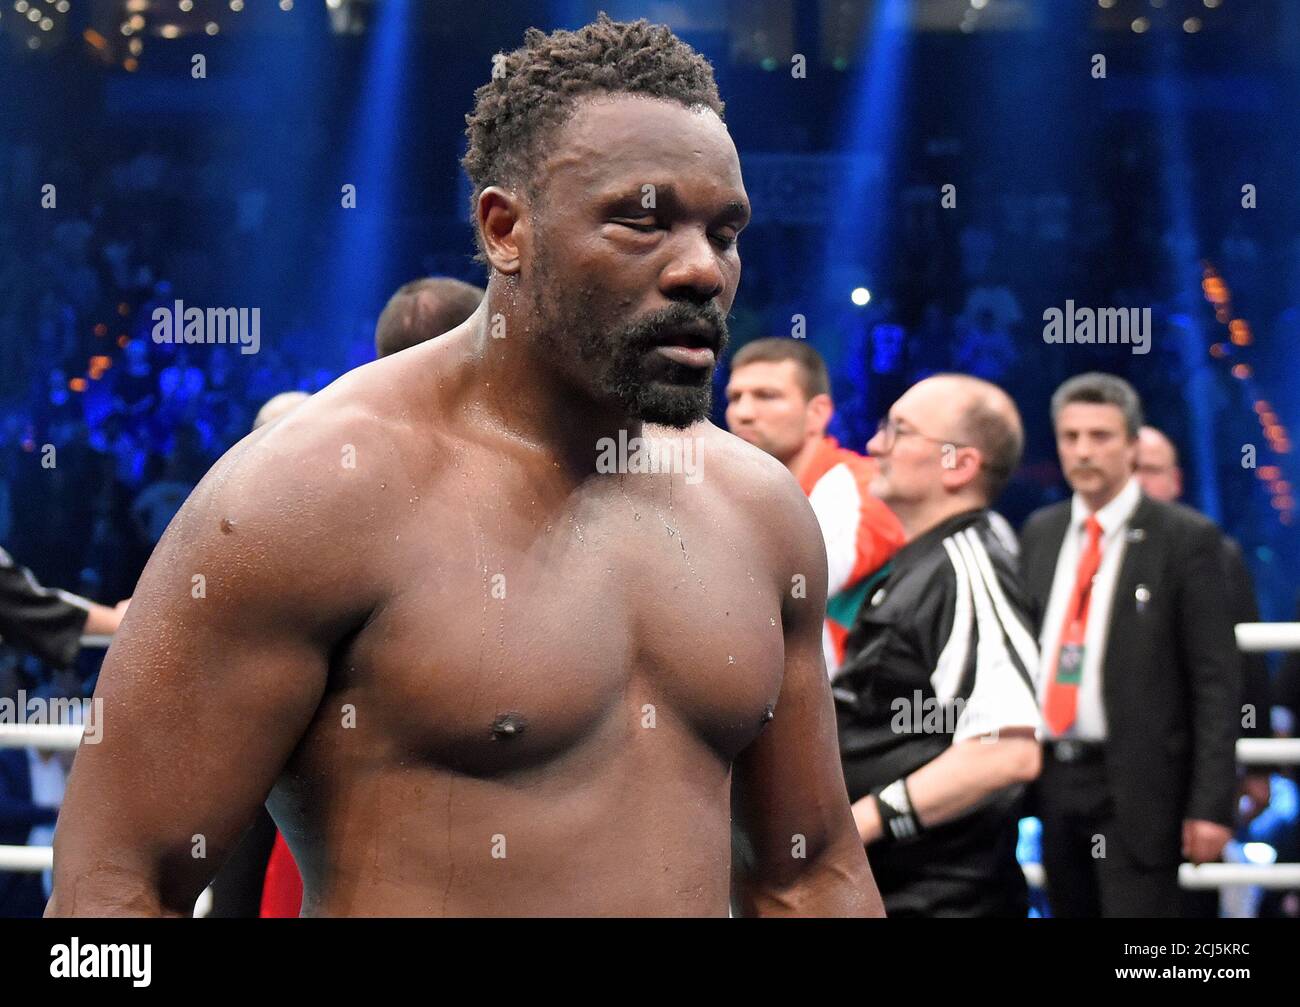 Boxing - European boxing heavyweight championship fight - Hamburg, Germany - 7/5/16 -Britain's Dereck Chisora after the fight against Bulgaria's Kubrat Pulev  REUTERS/Fabian Bimmer Stock Photo